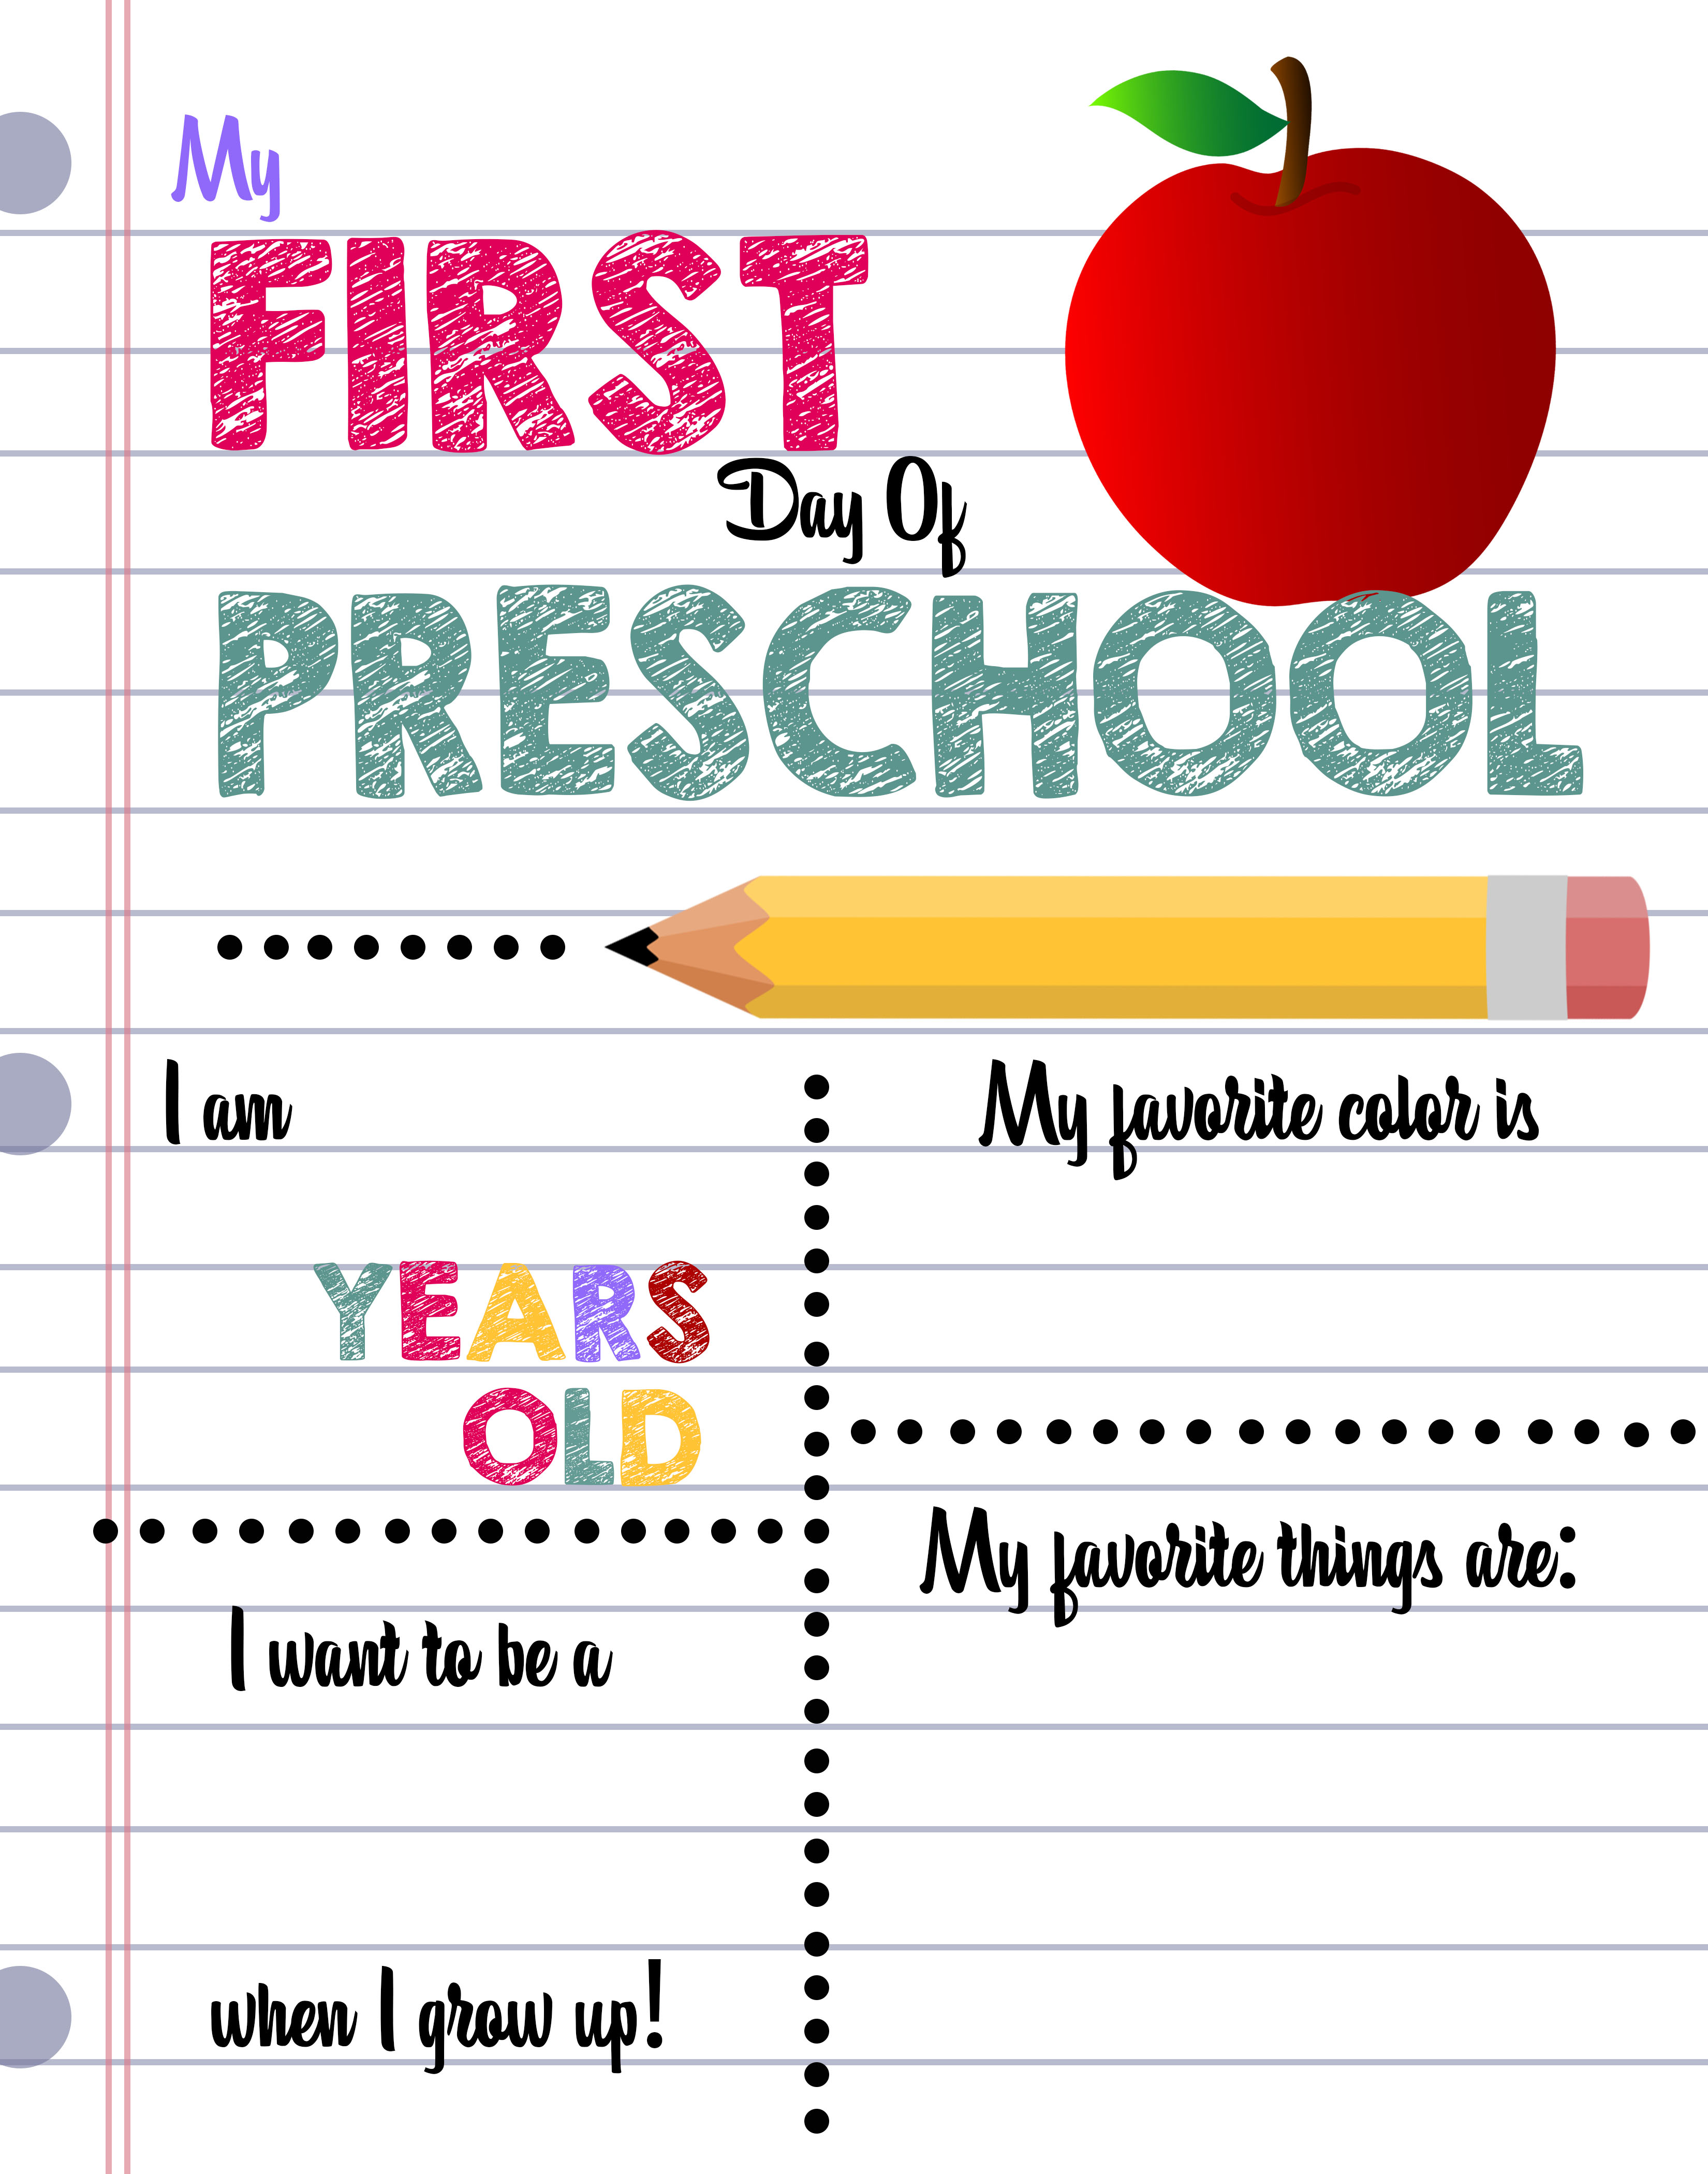 first day of kindergarten printable sign